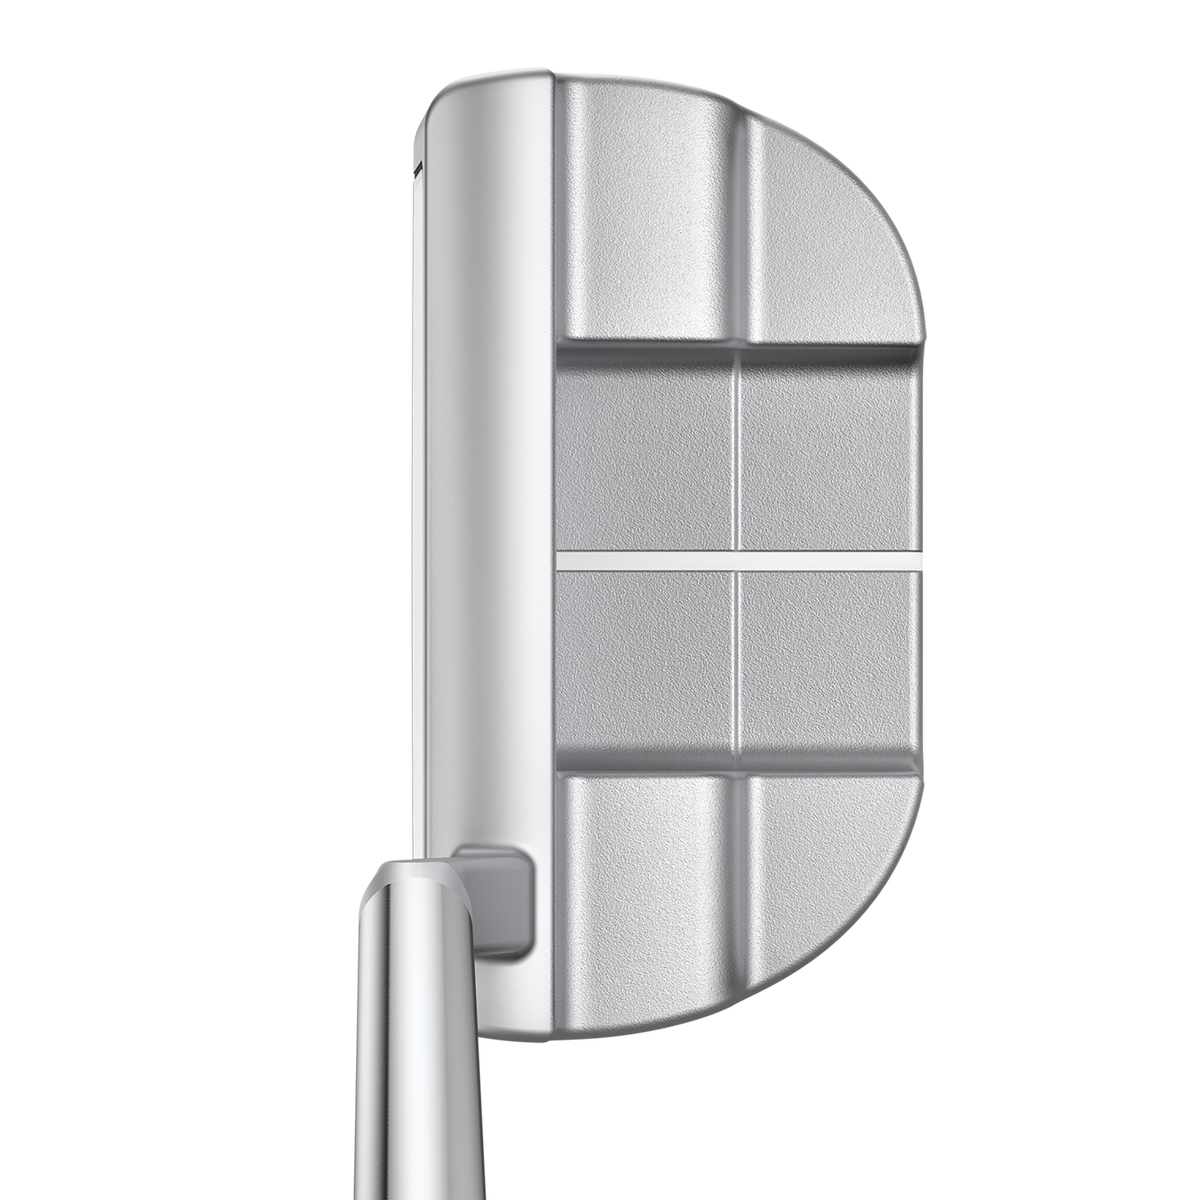 PING Women's G Le3 Louise Putter